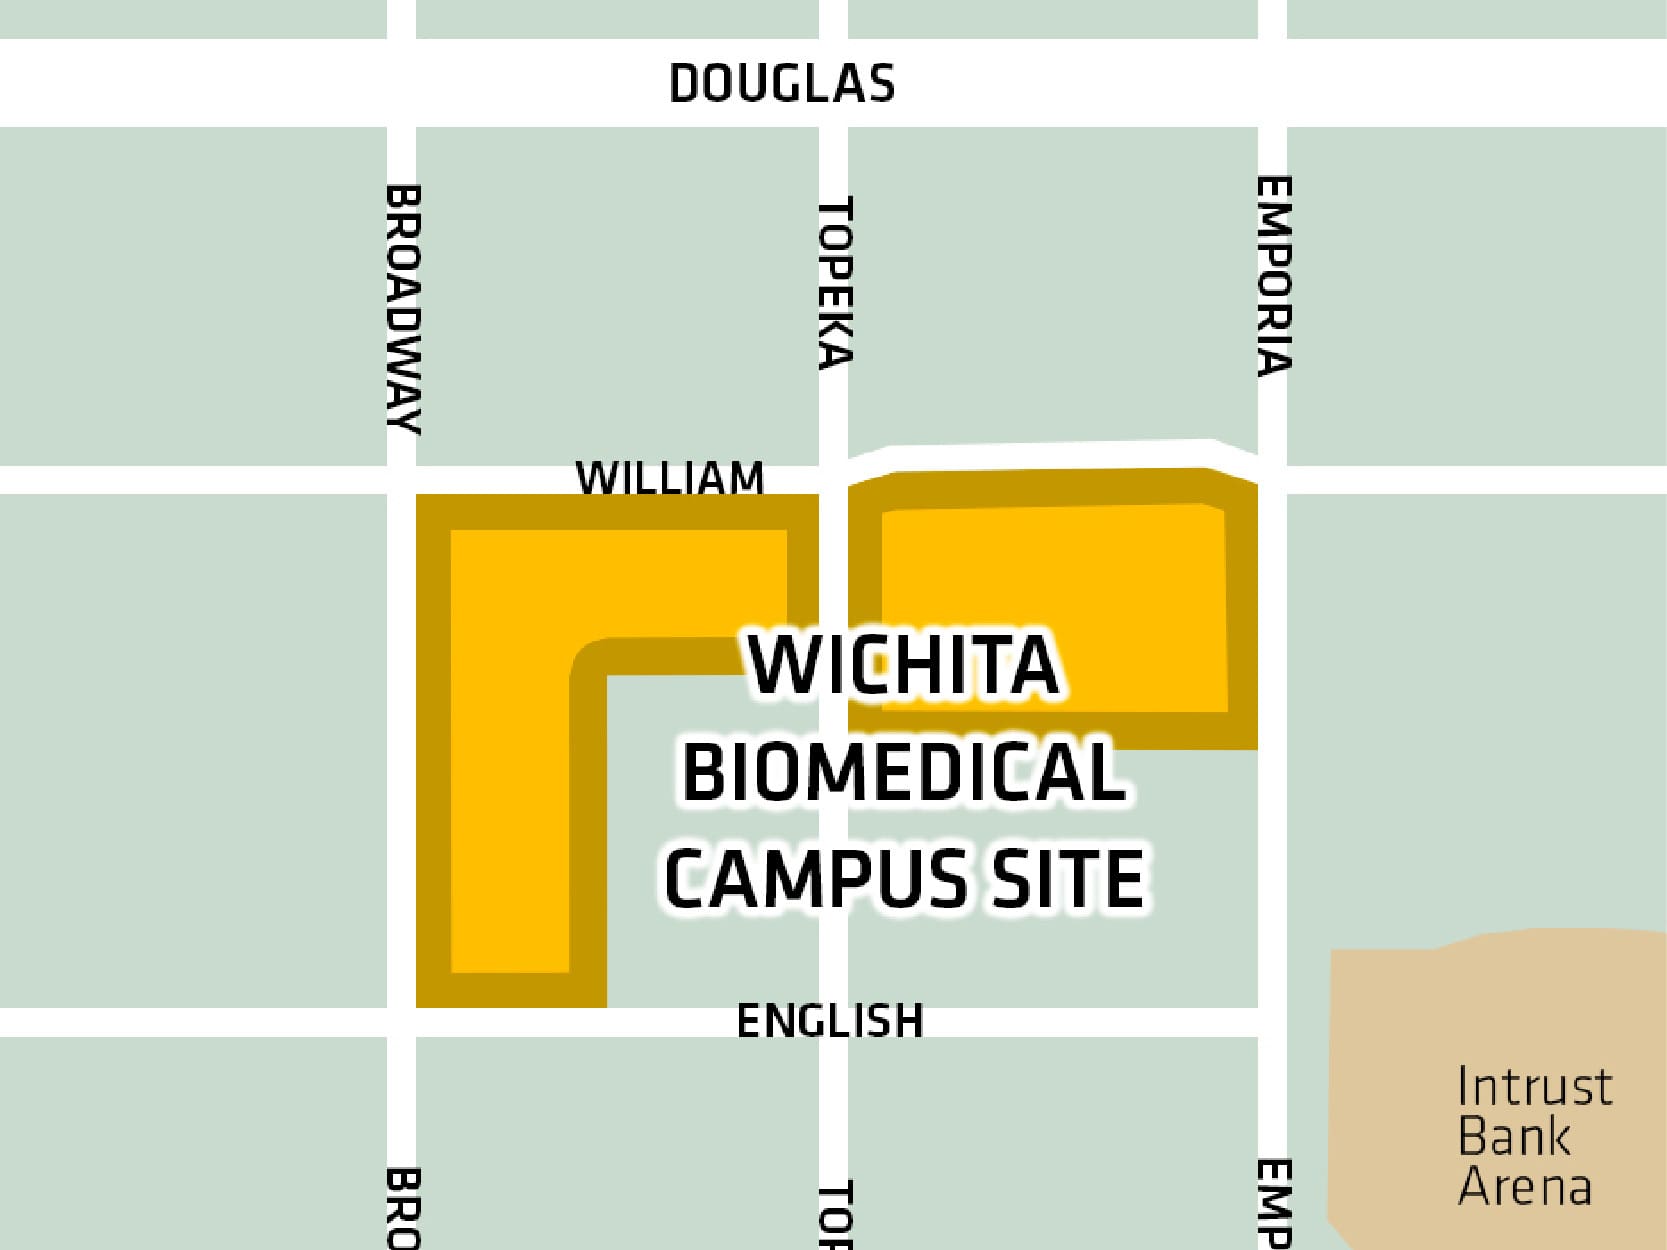 Map showing the location of the upcoming Wichita Biomedical Campus